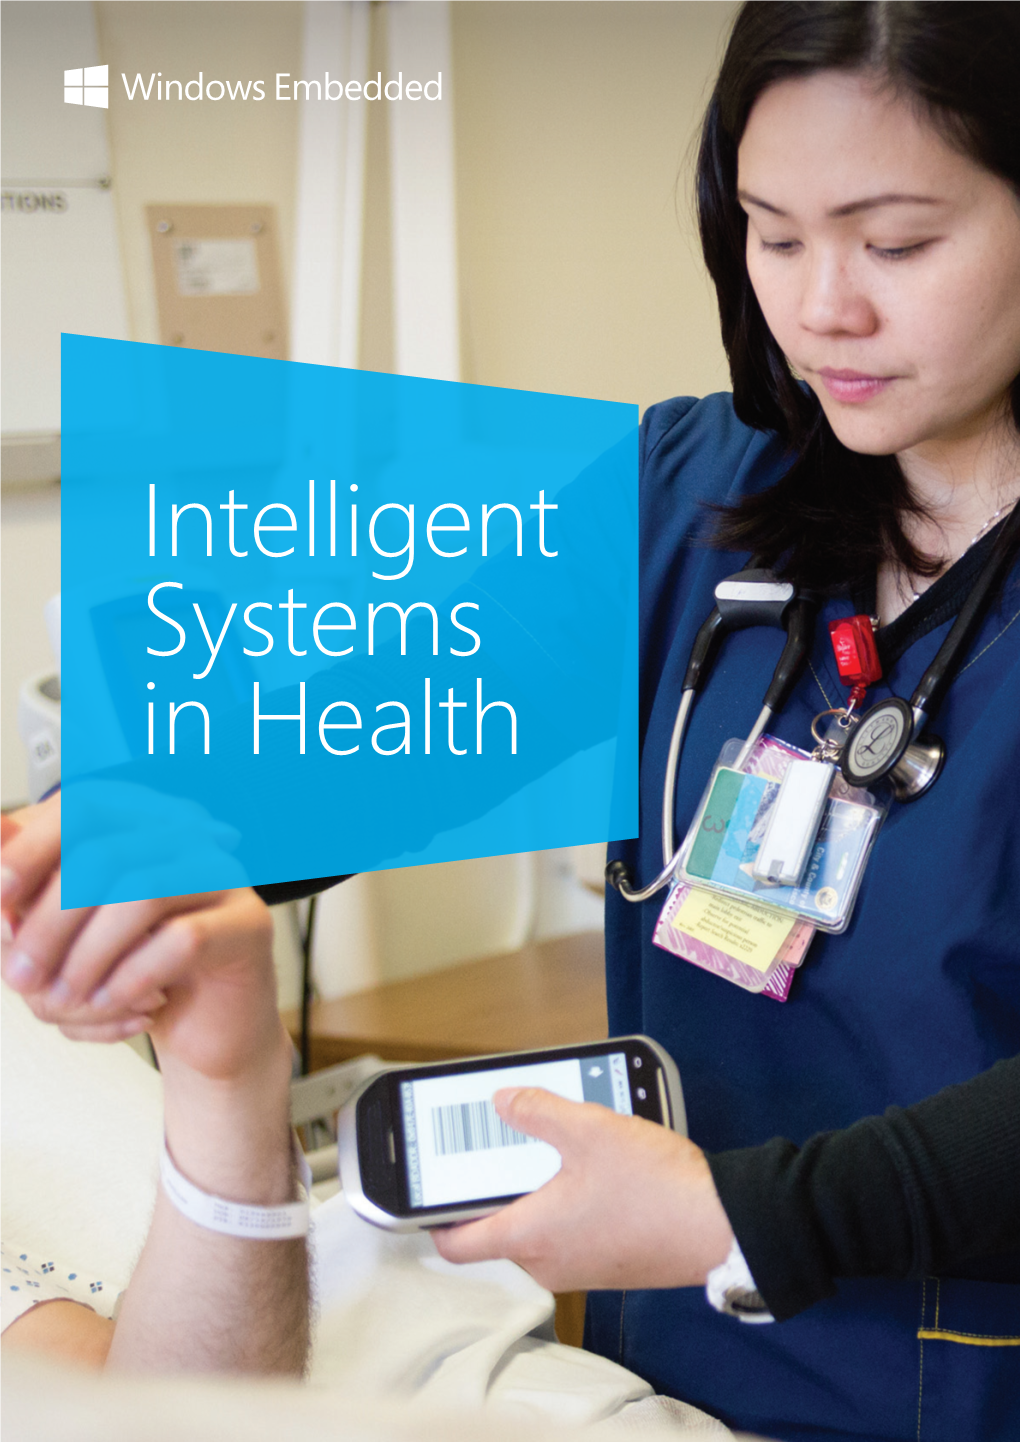 Intelligent Systems in Health the Internet of Things Transform Your Health Organization Starts with Your Things with Intelligent Systems